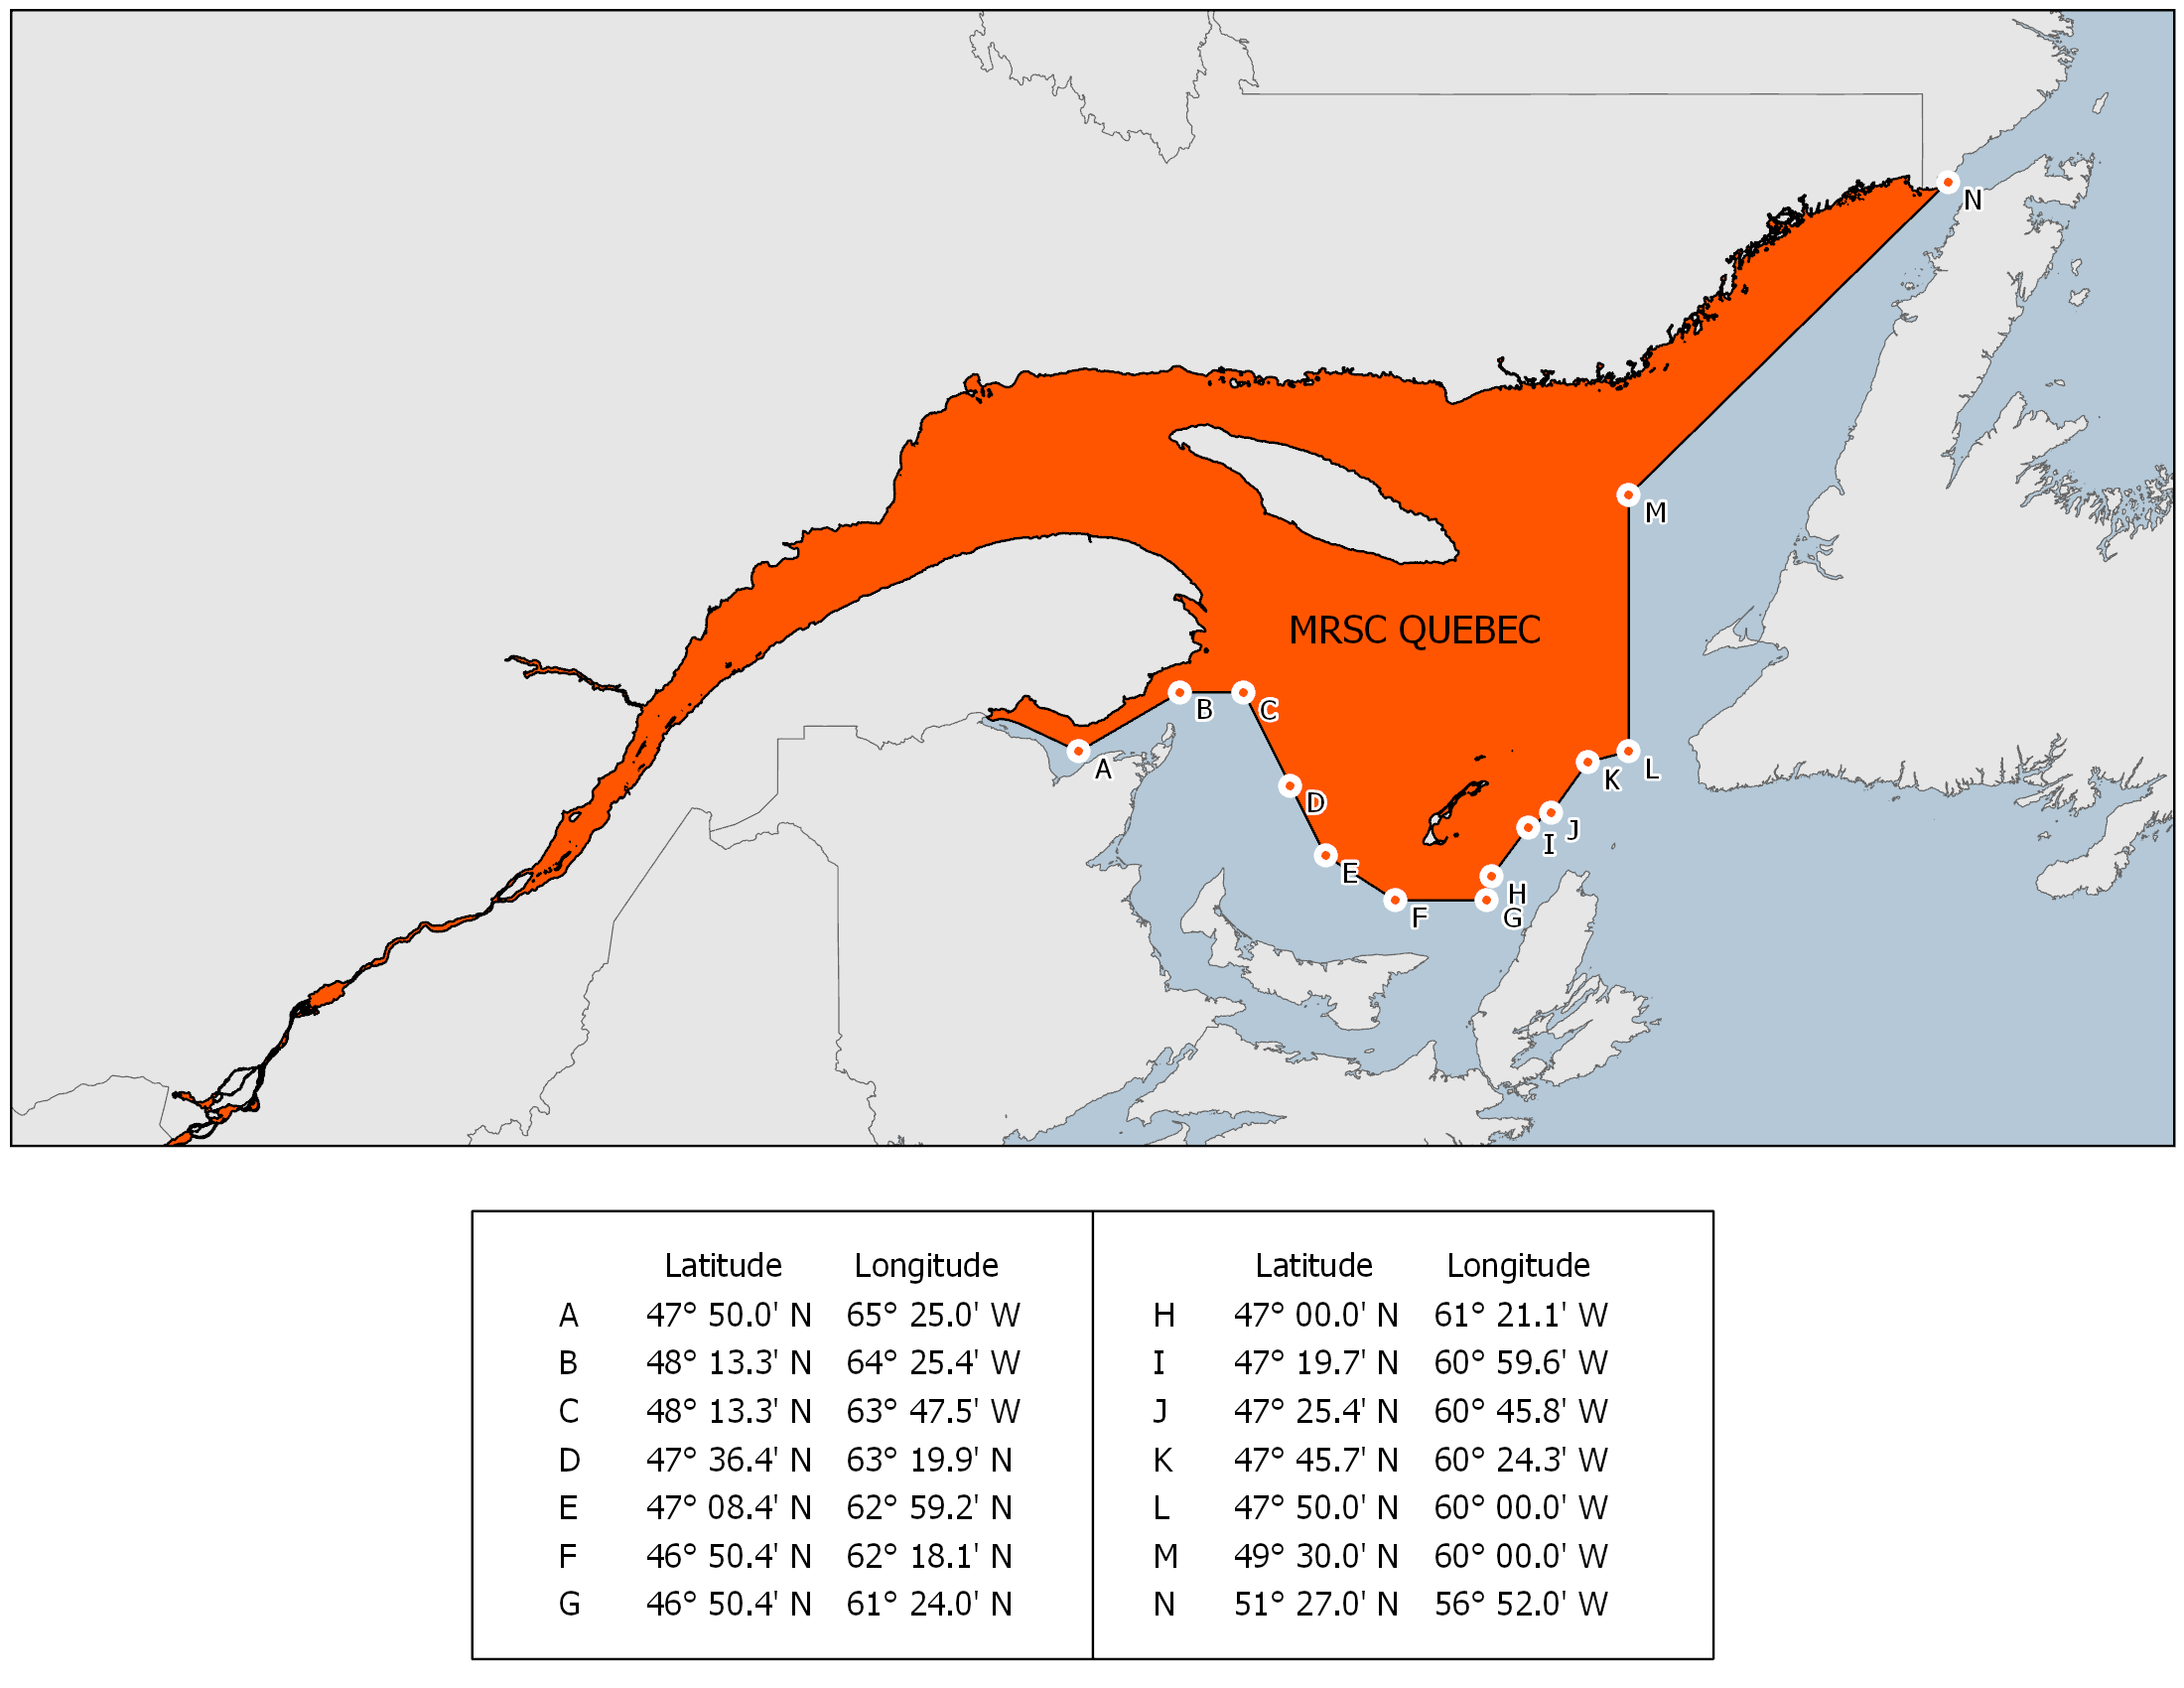 Map outlining MRSC Quebec's search and rescue sub-region